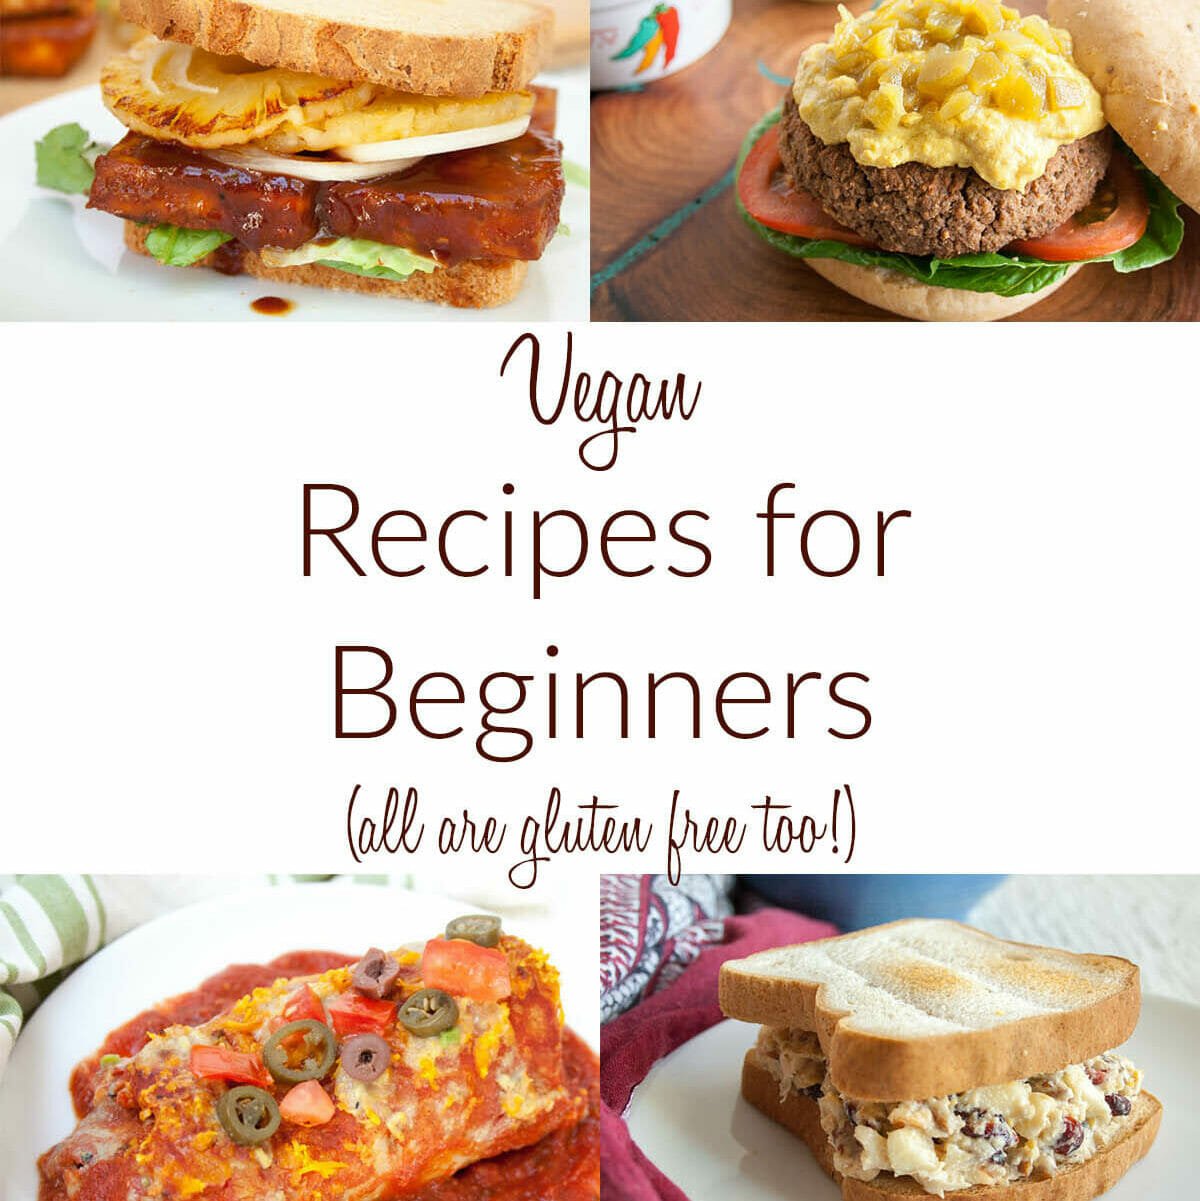 Collage photo with text that reads, "Vegan Recipes for Beginners, all are gluten free too!) 